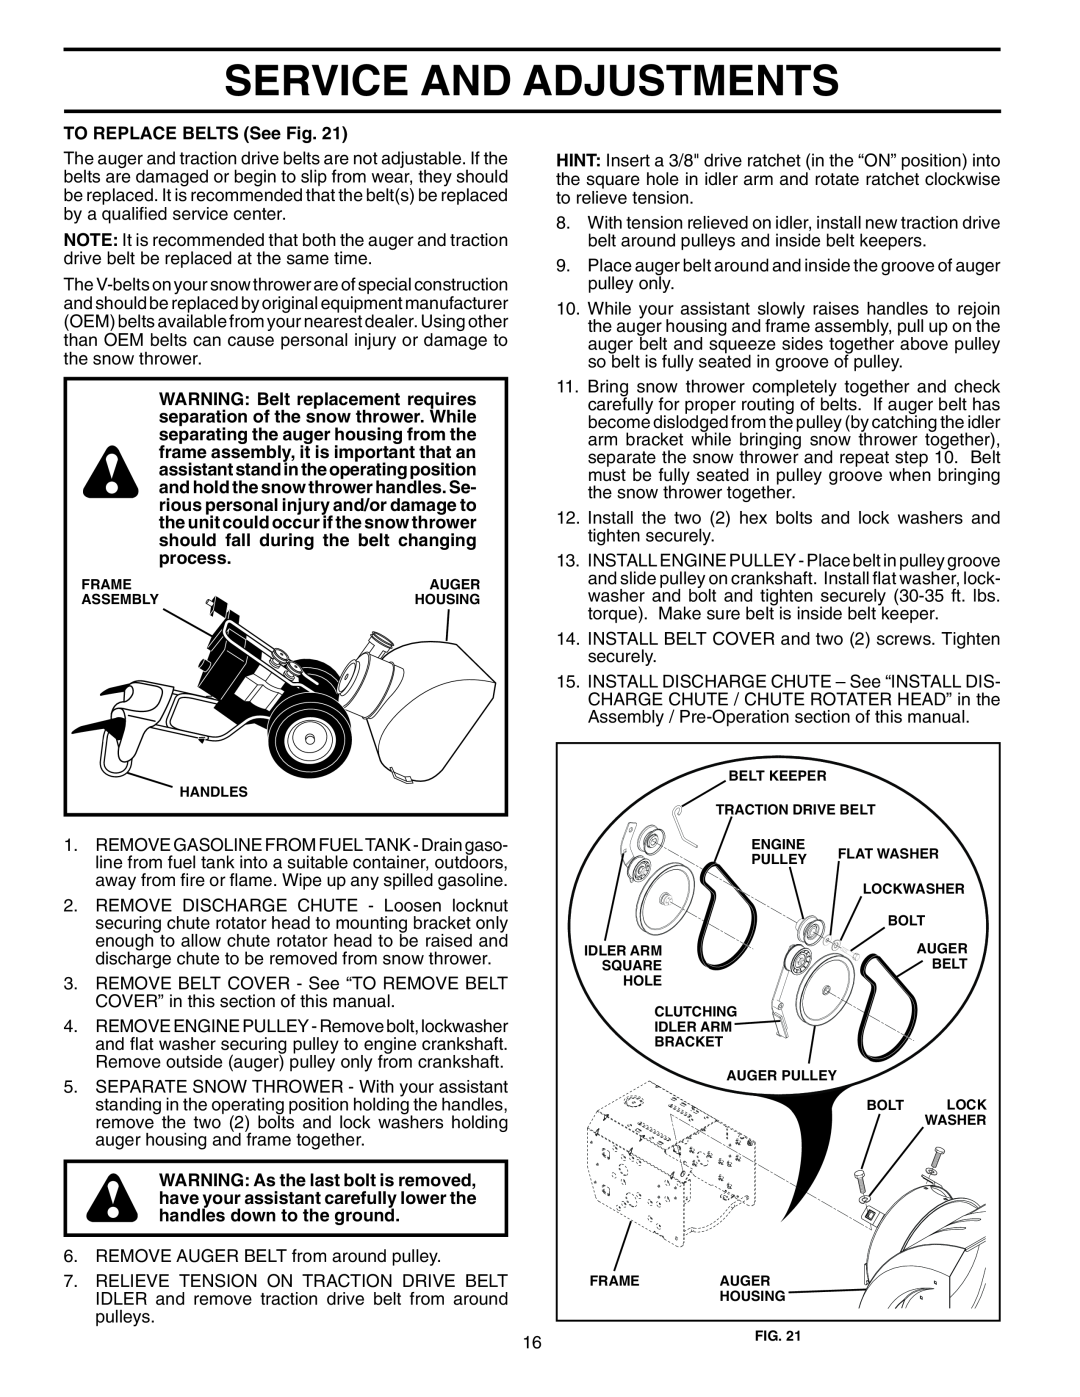 Husqvarna 924SBE owner manual Service And Adjustments, TO REPLACE BELTS See Fig 